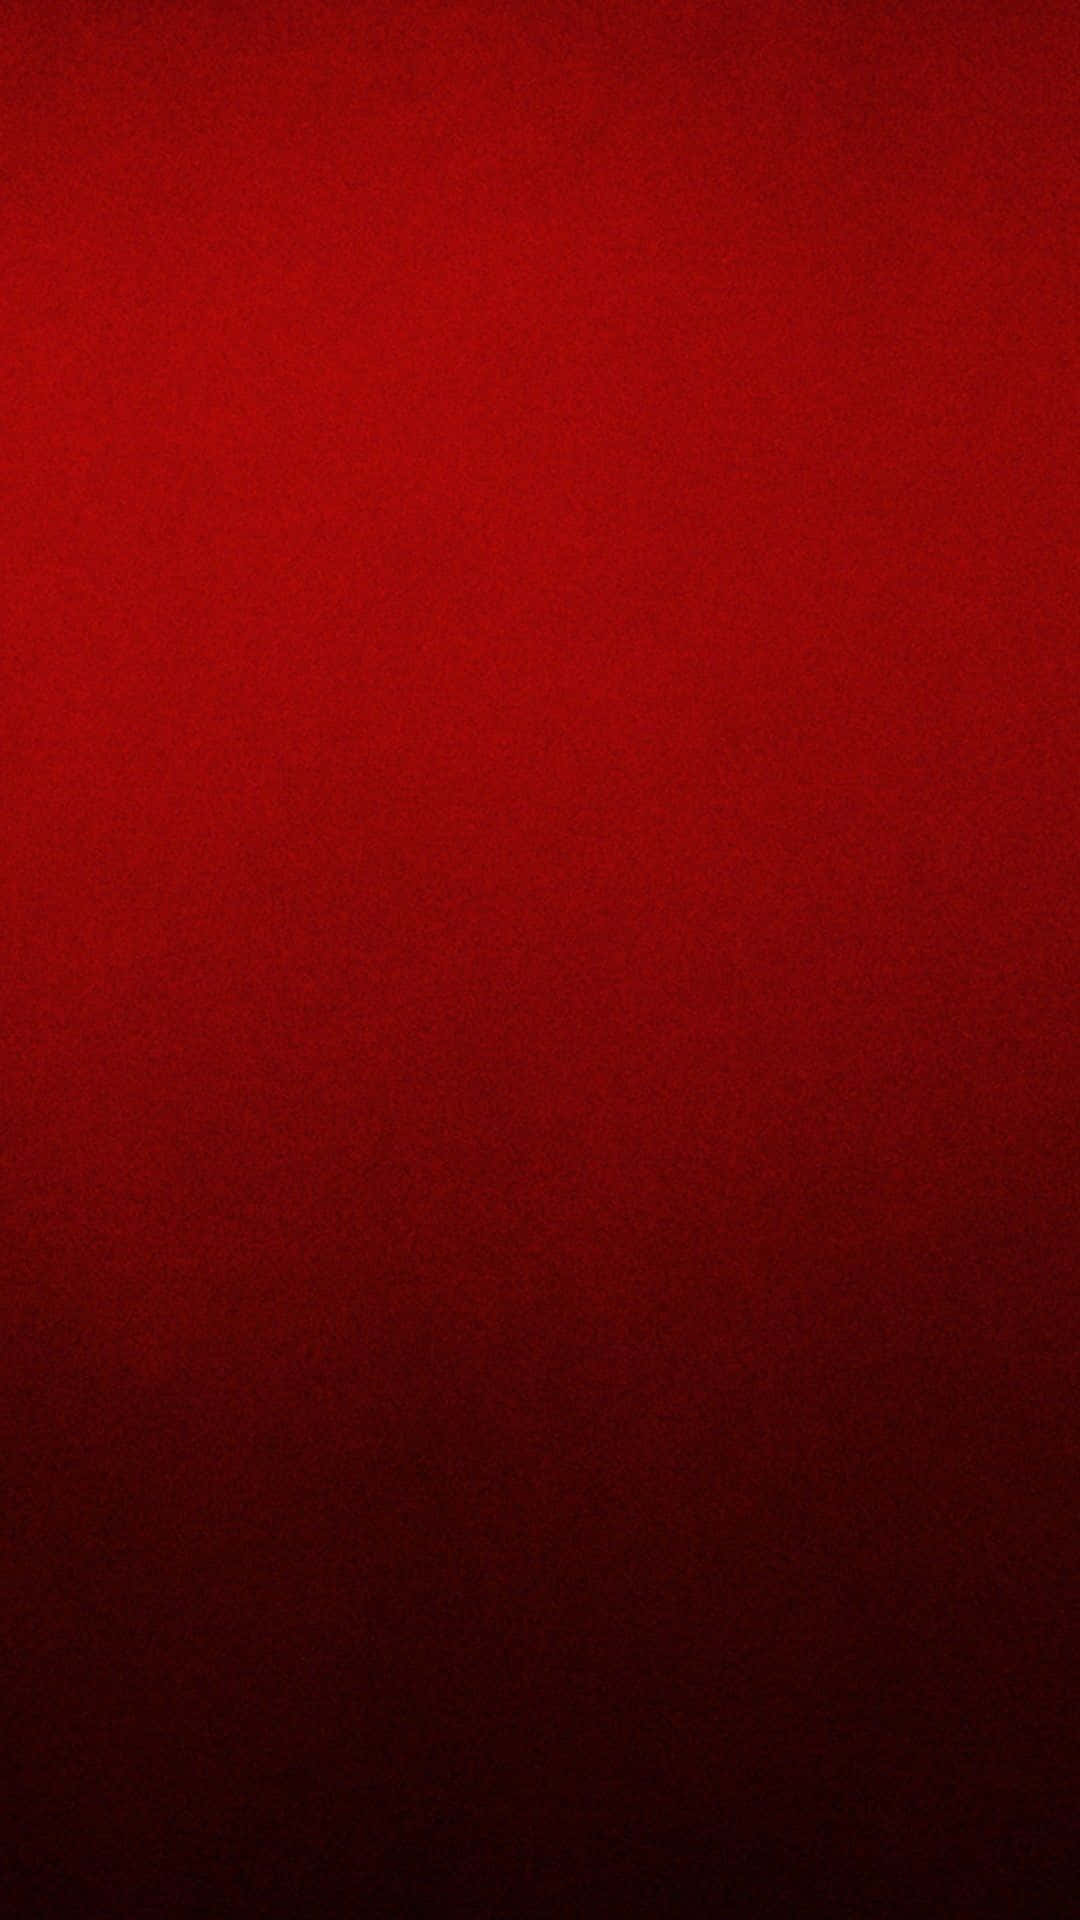 Vibrant red ombre background